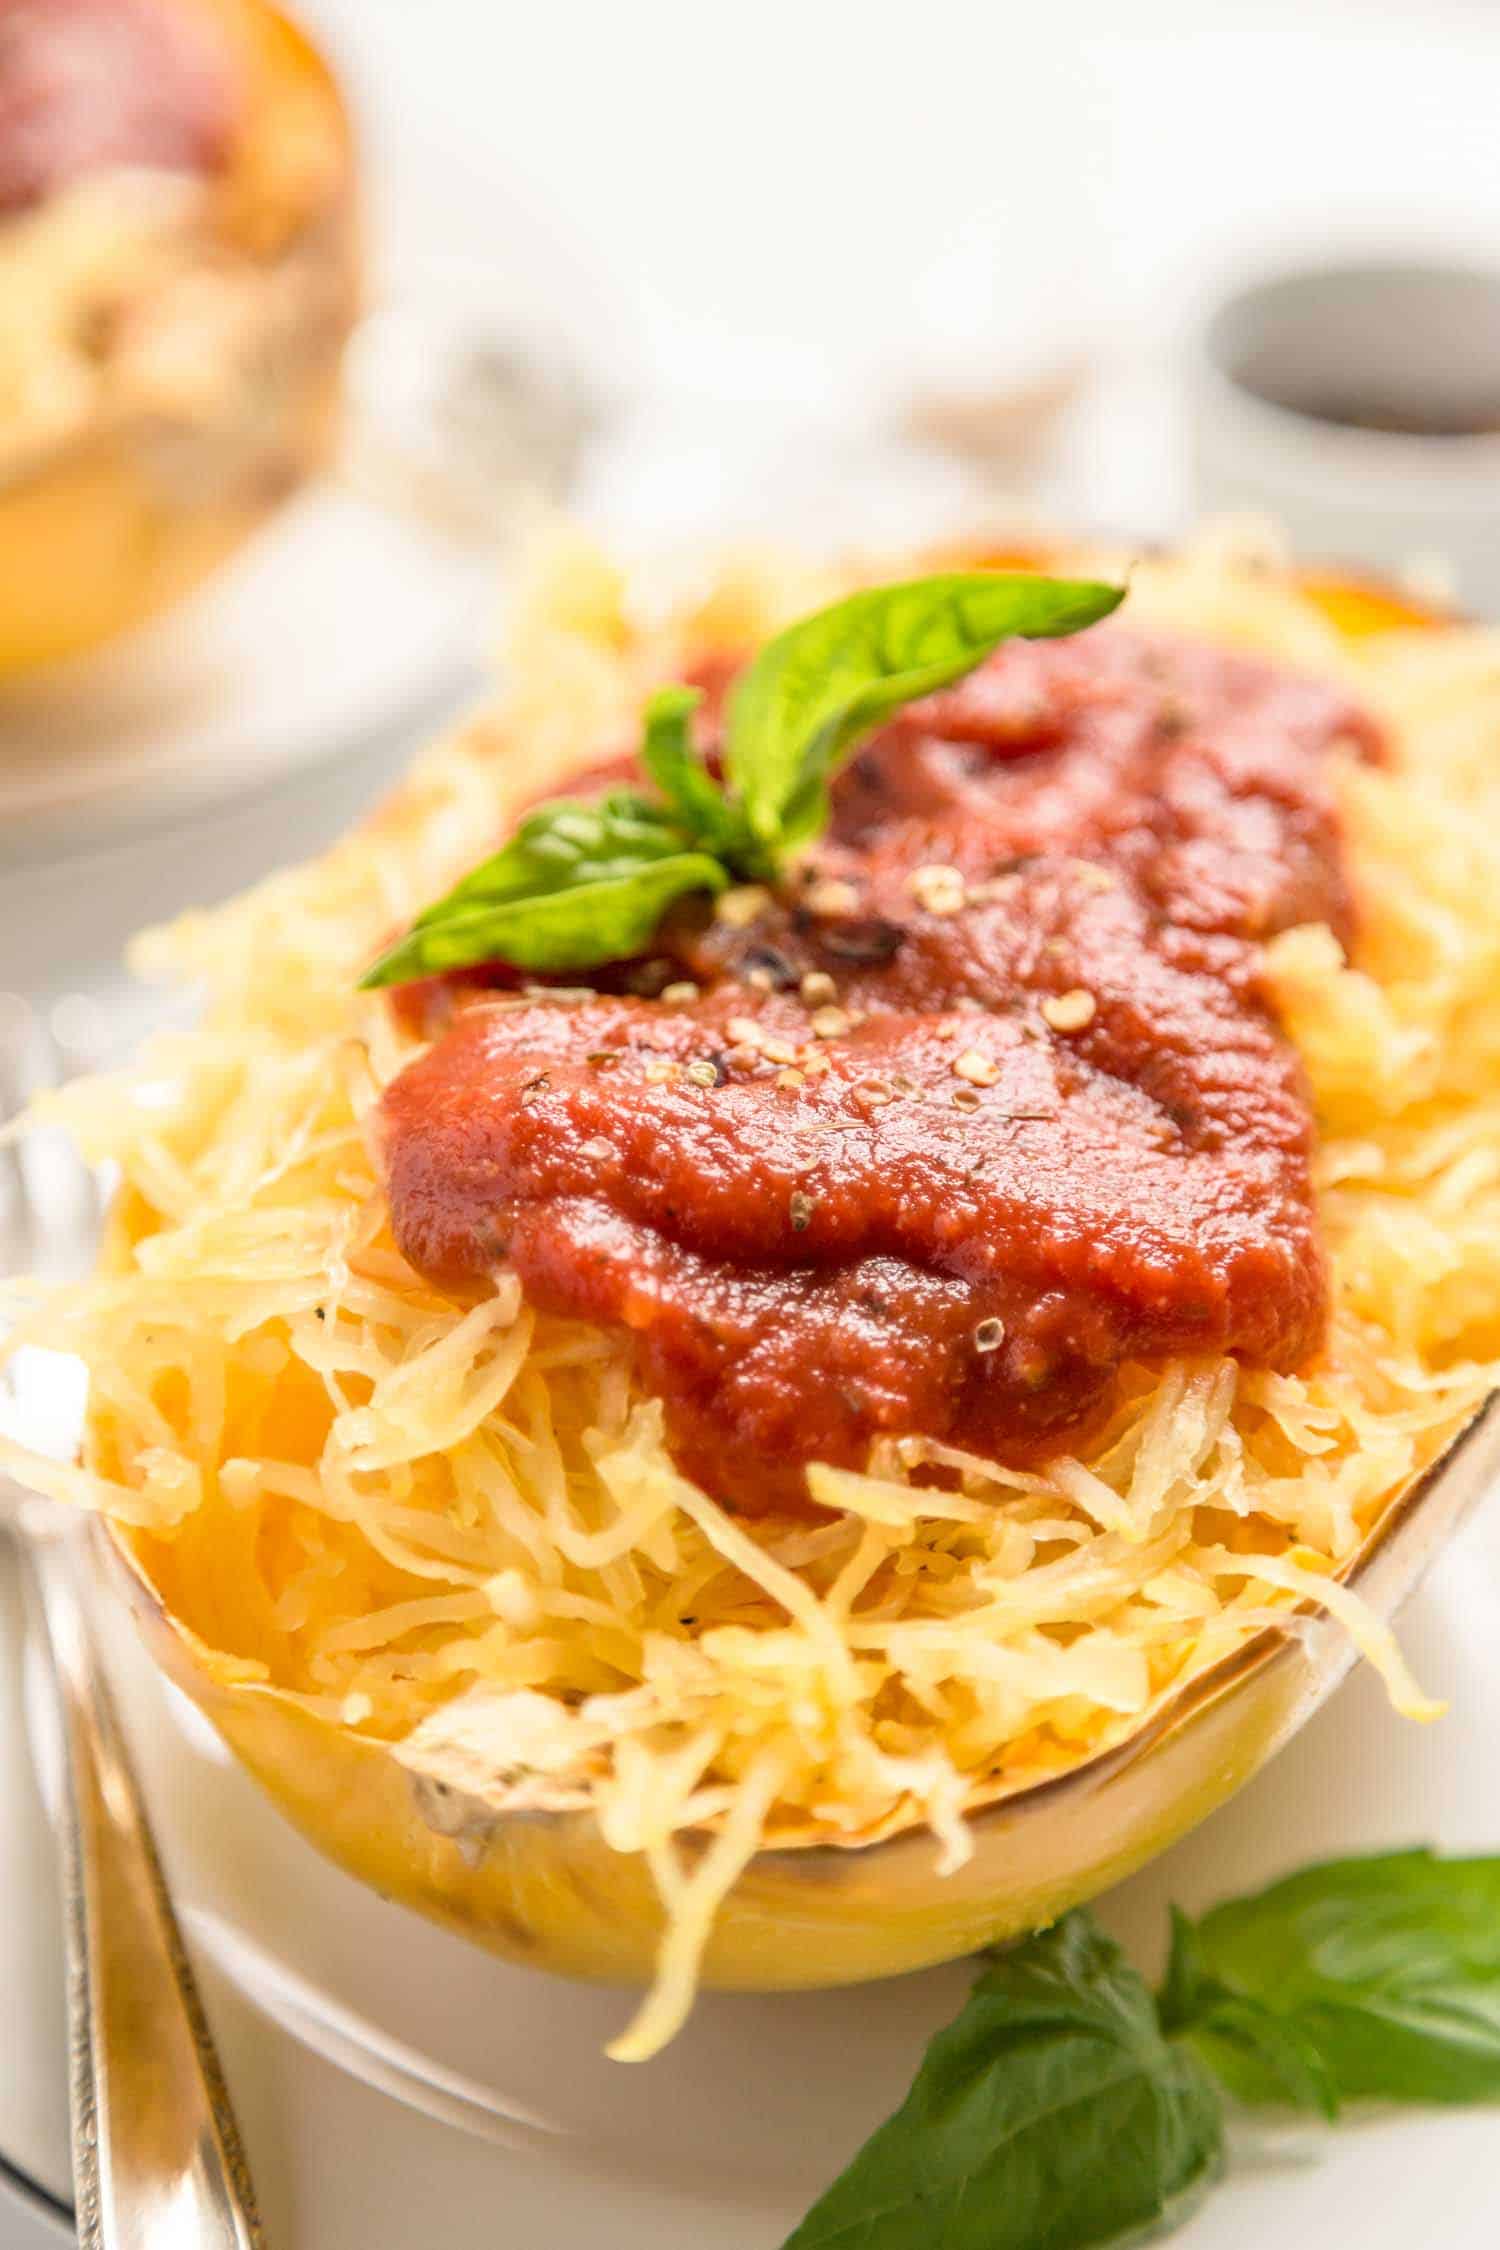 Cooked spaghetti squash turned into healthy noodles with marinara sauce on top.